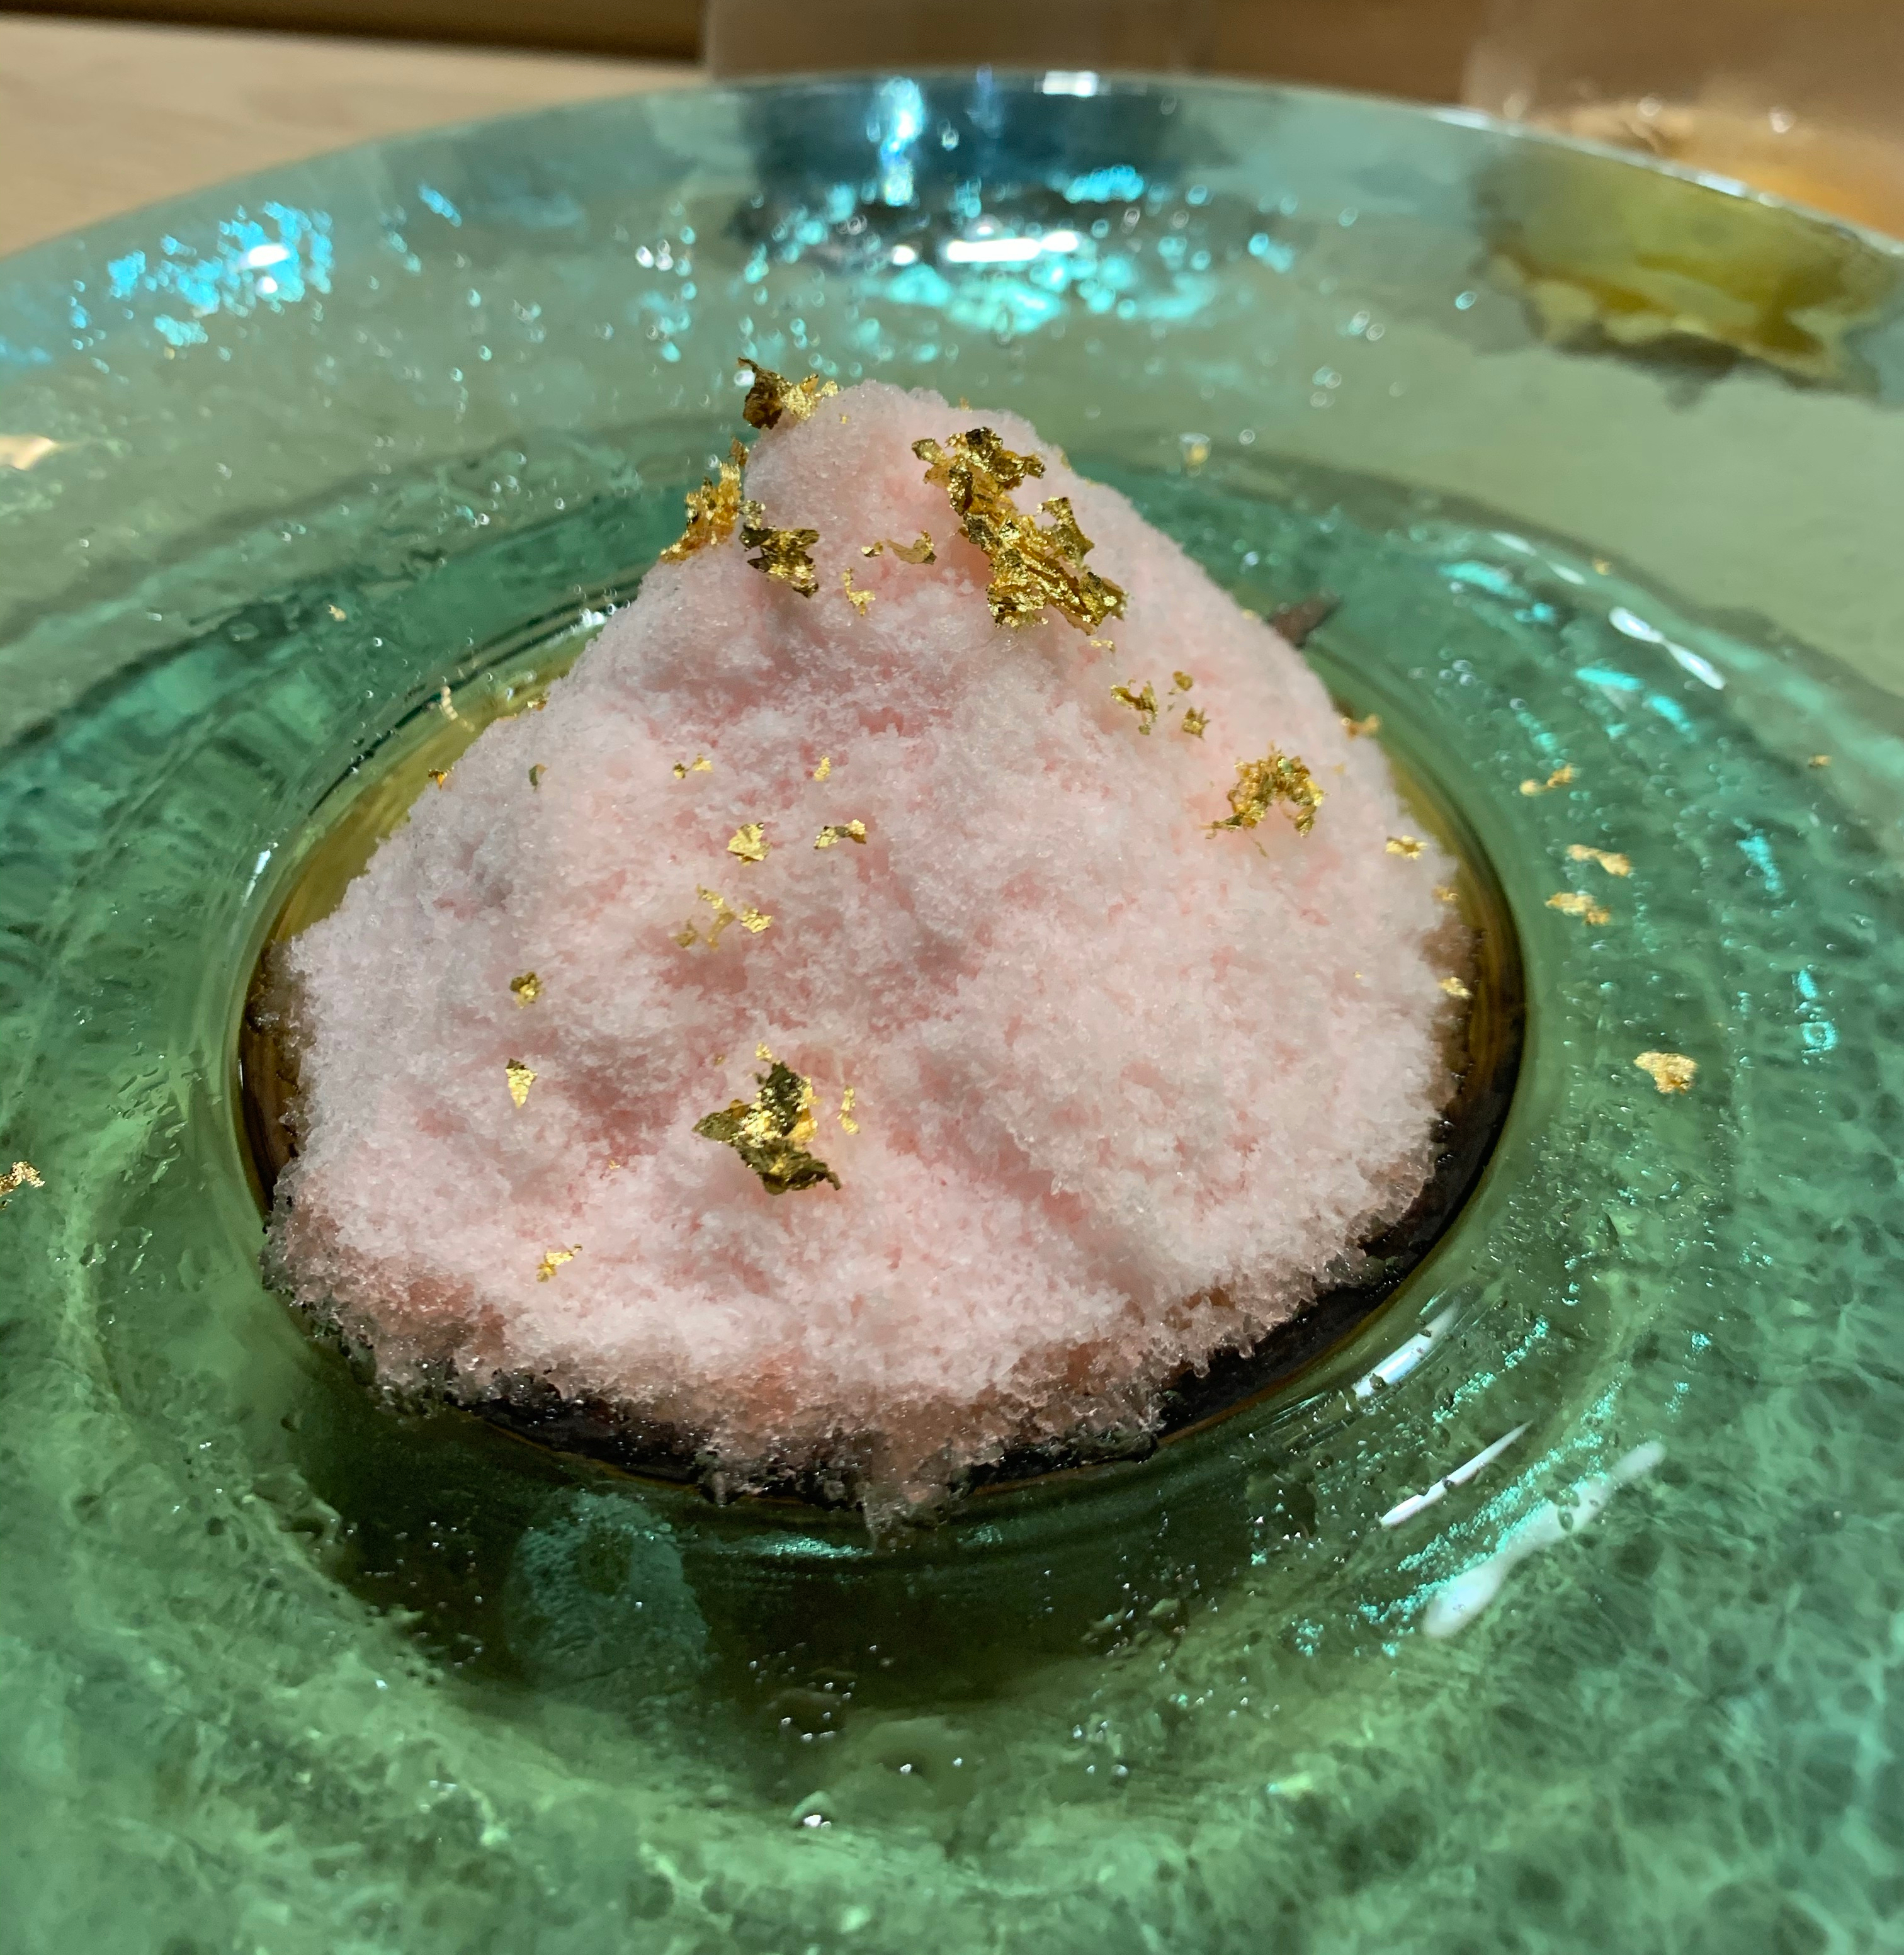 Very finely-shaved ice, coloured pink, with gold flakes served in a wide green bowl.